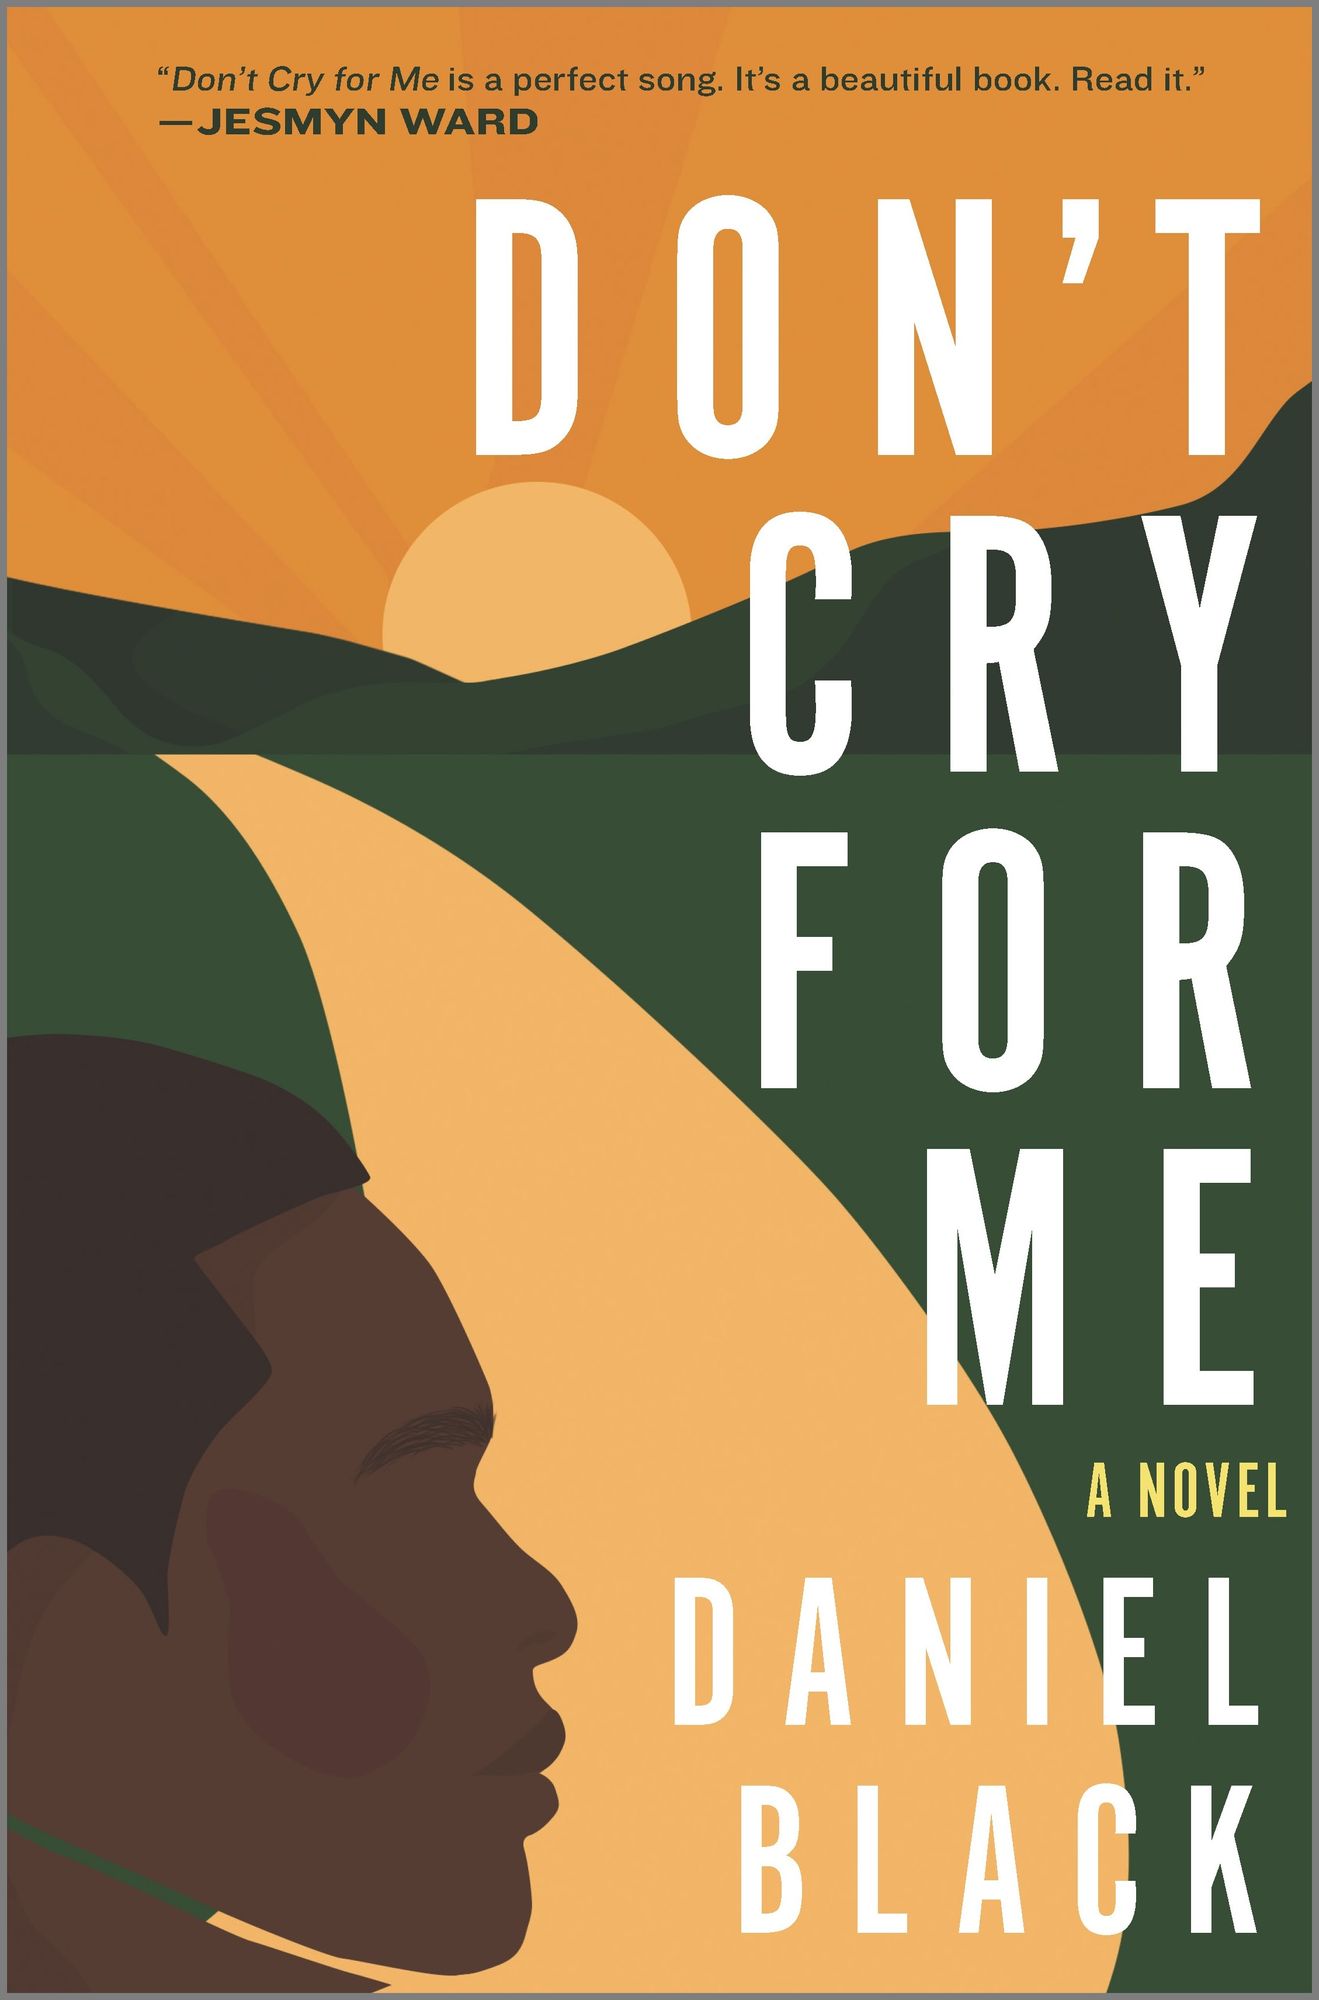 Don't Cry for Me by Daniel Black